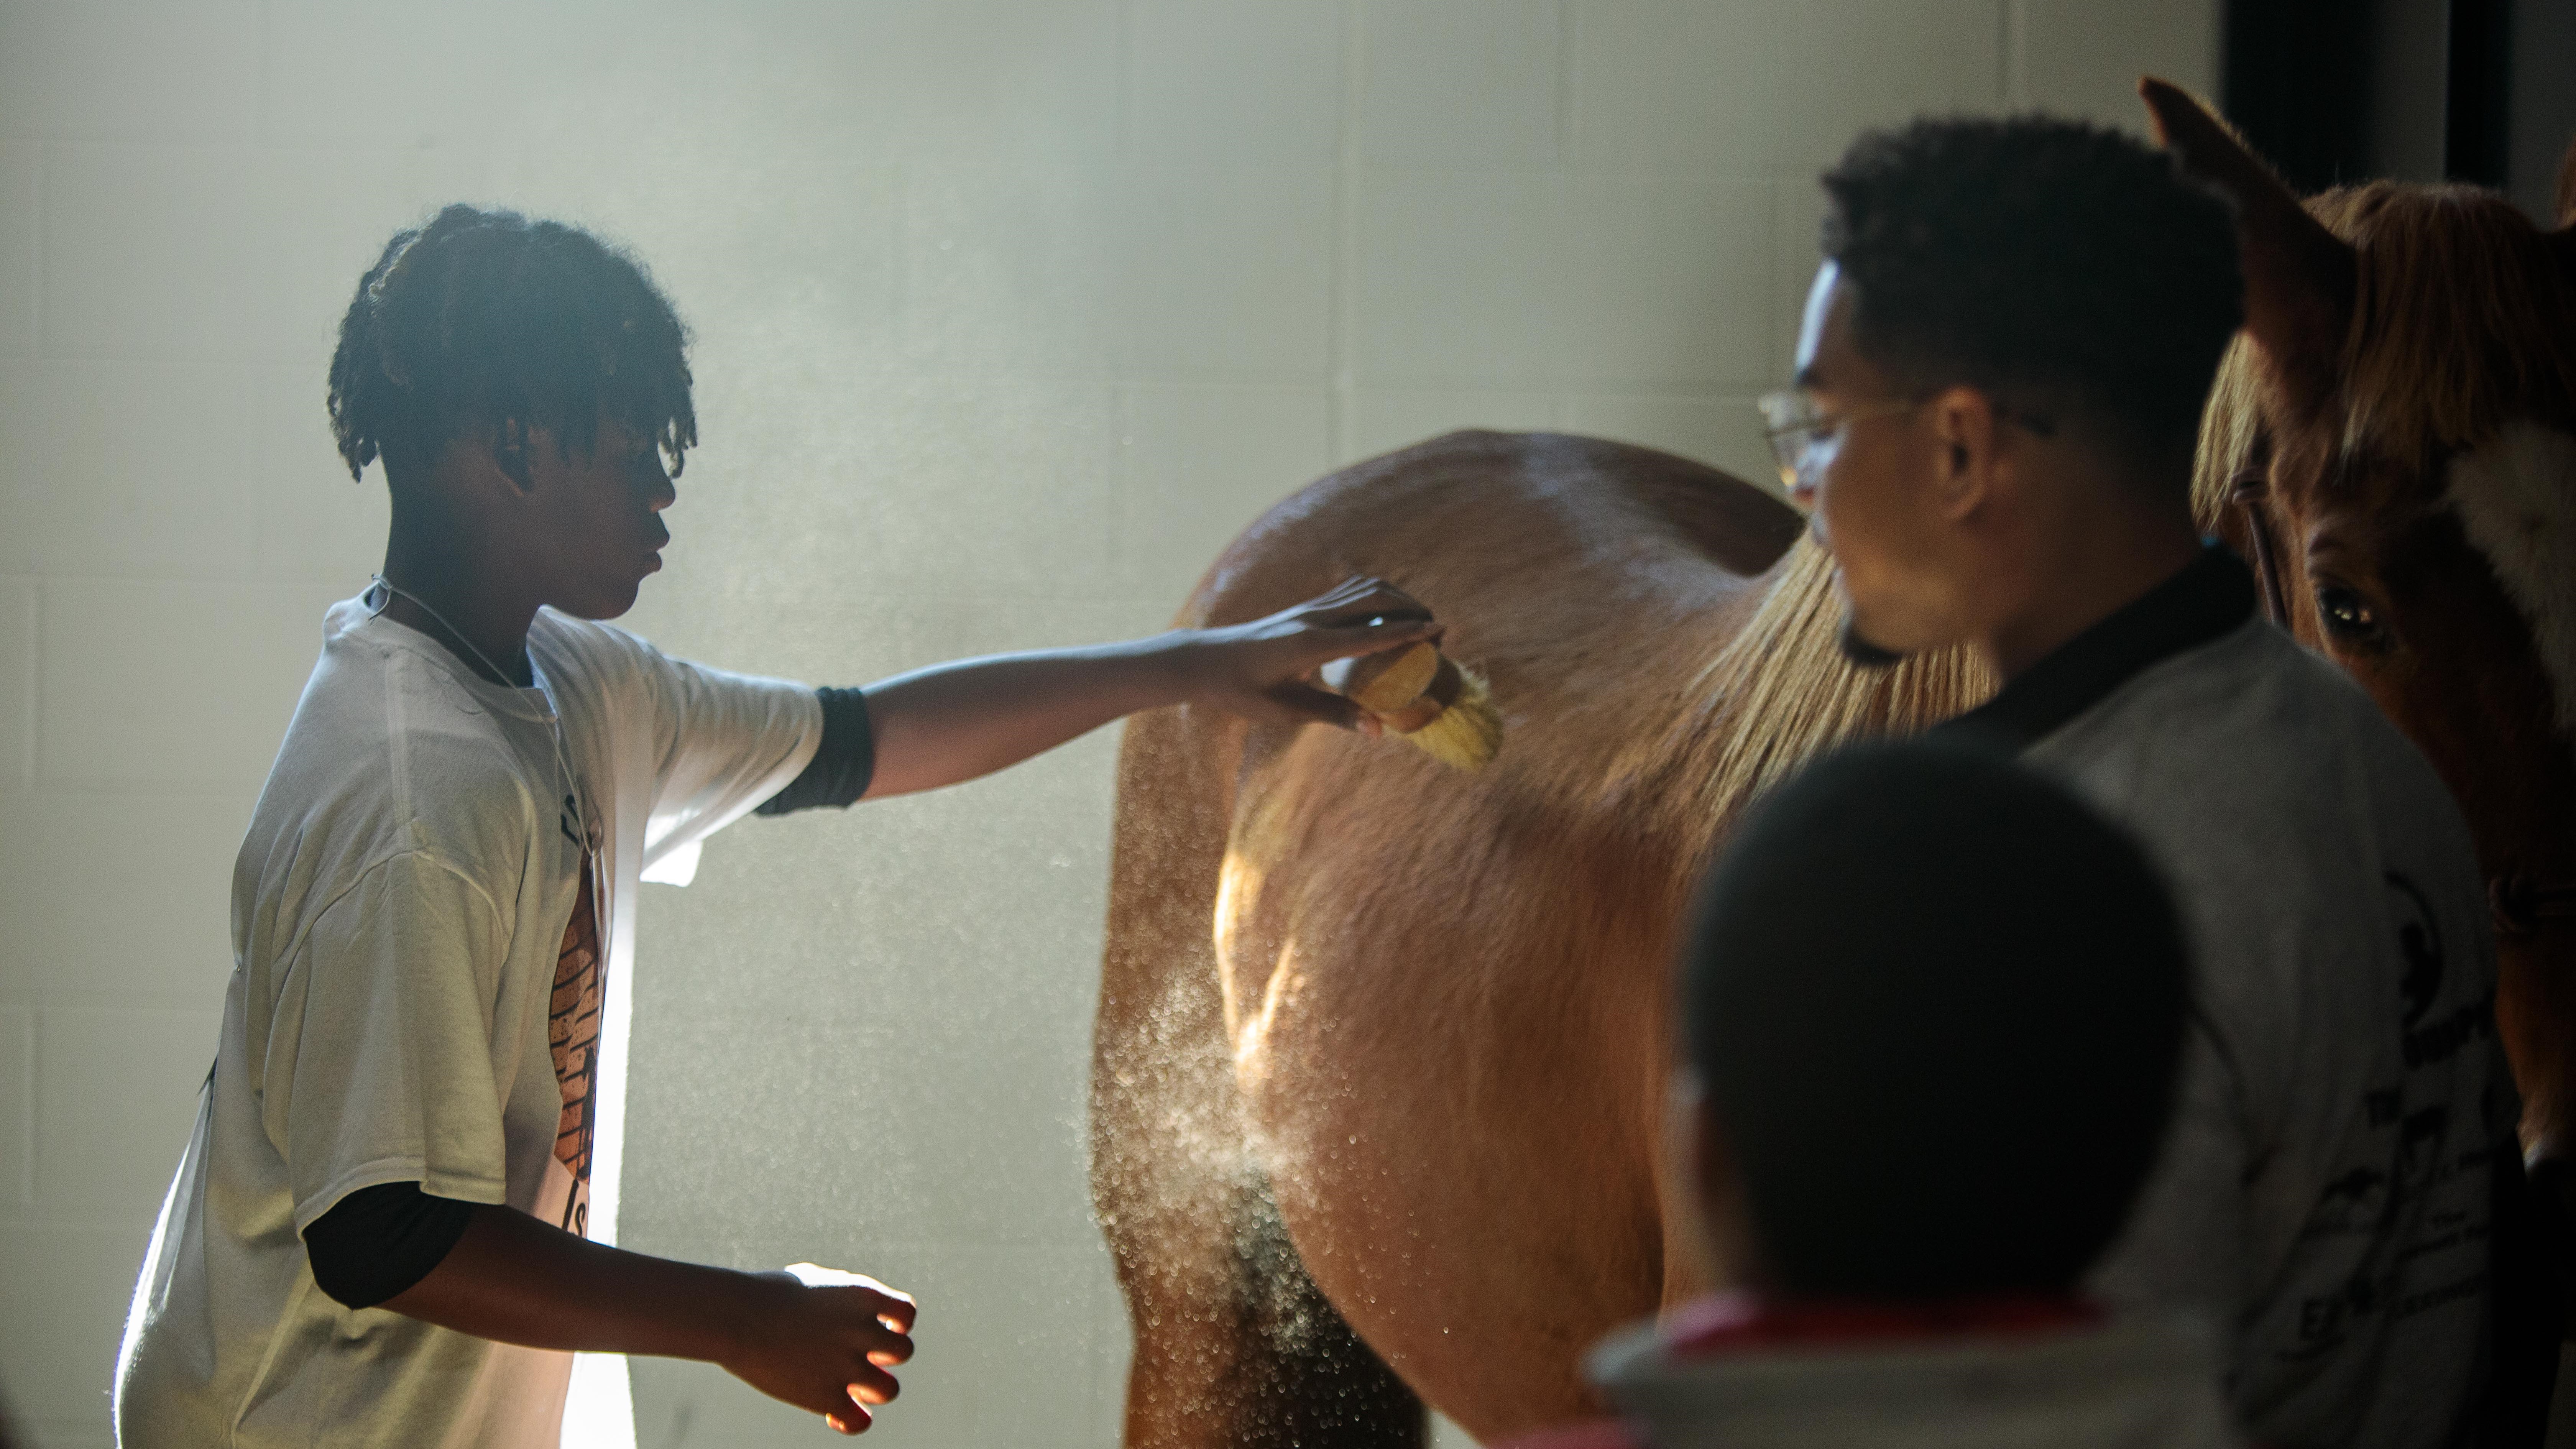 Youth grooming a horse at Equine Is For All event.